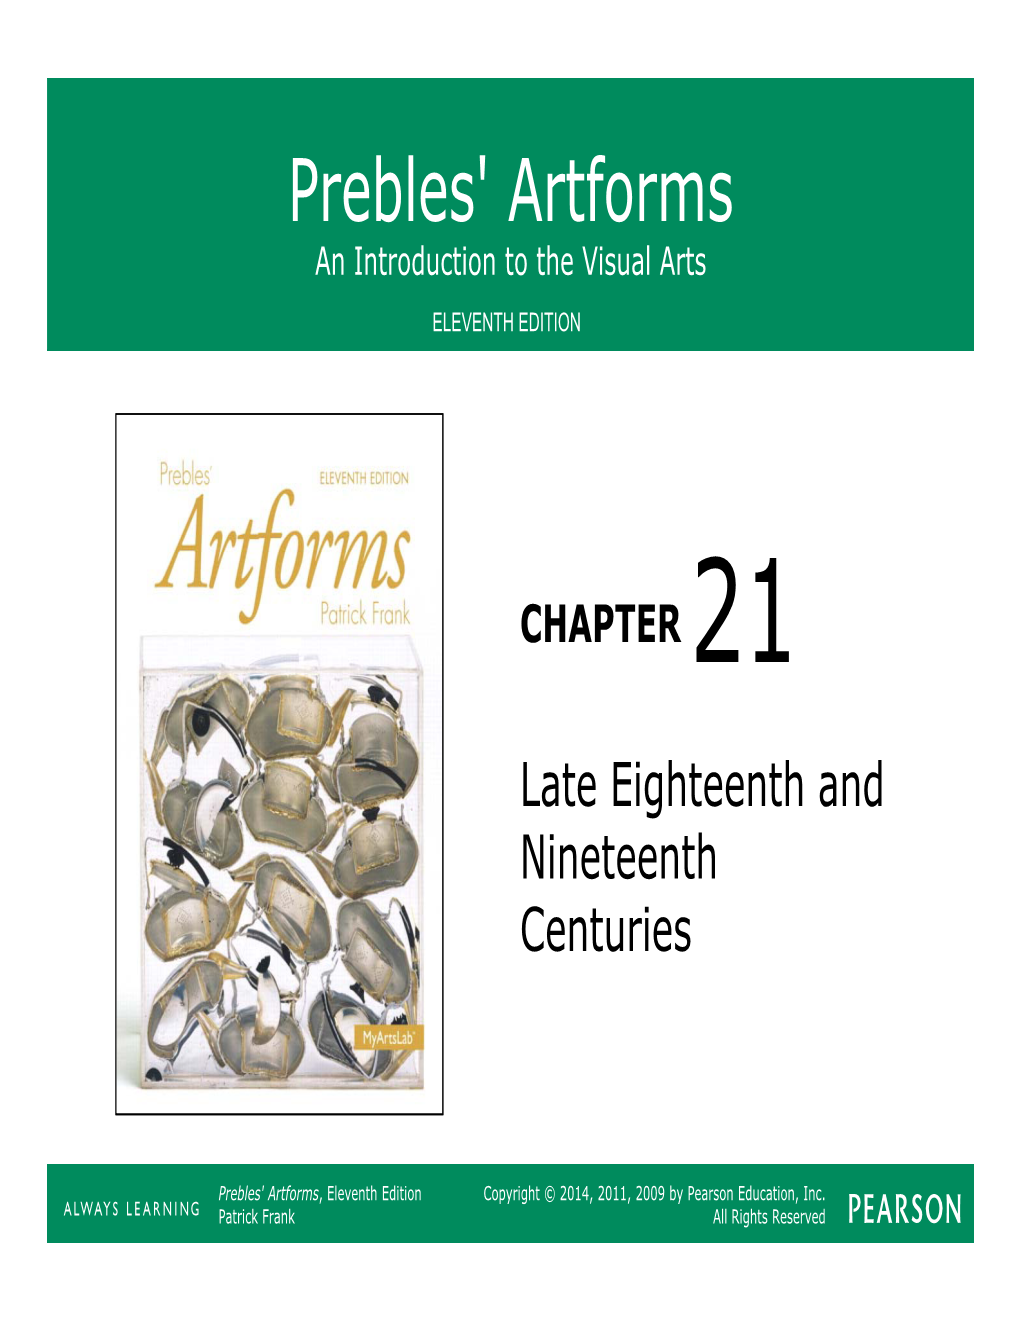 Prebles' Artforms an Introduction to the Visual Arts